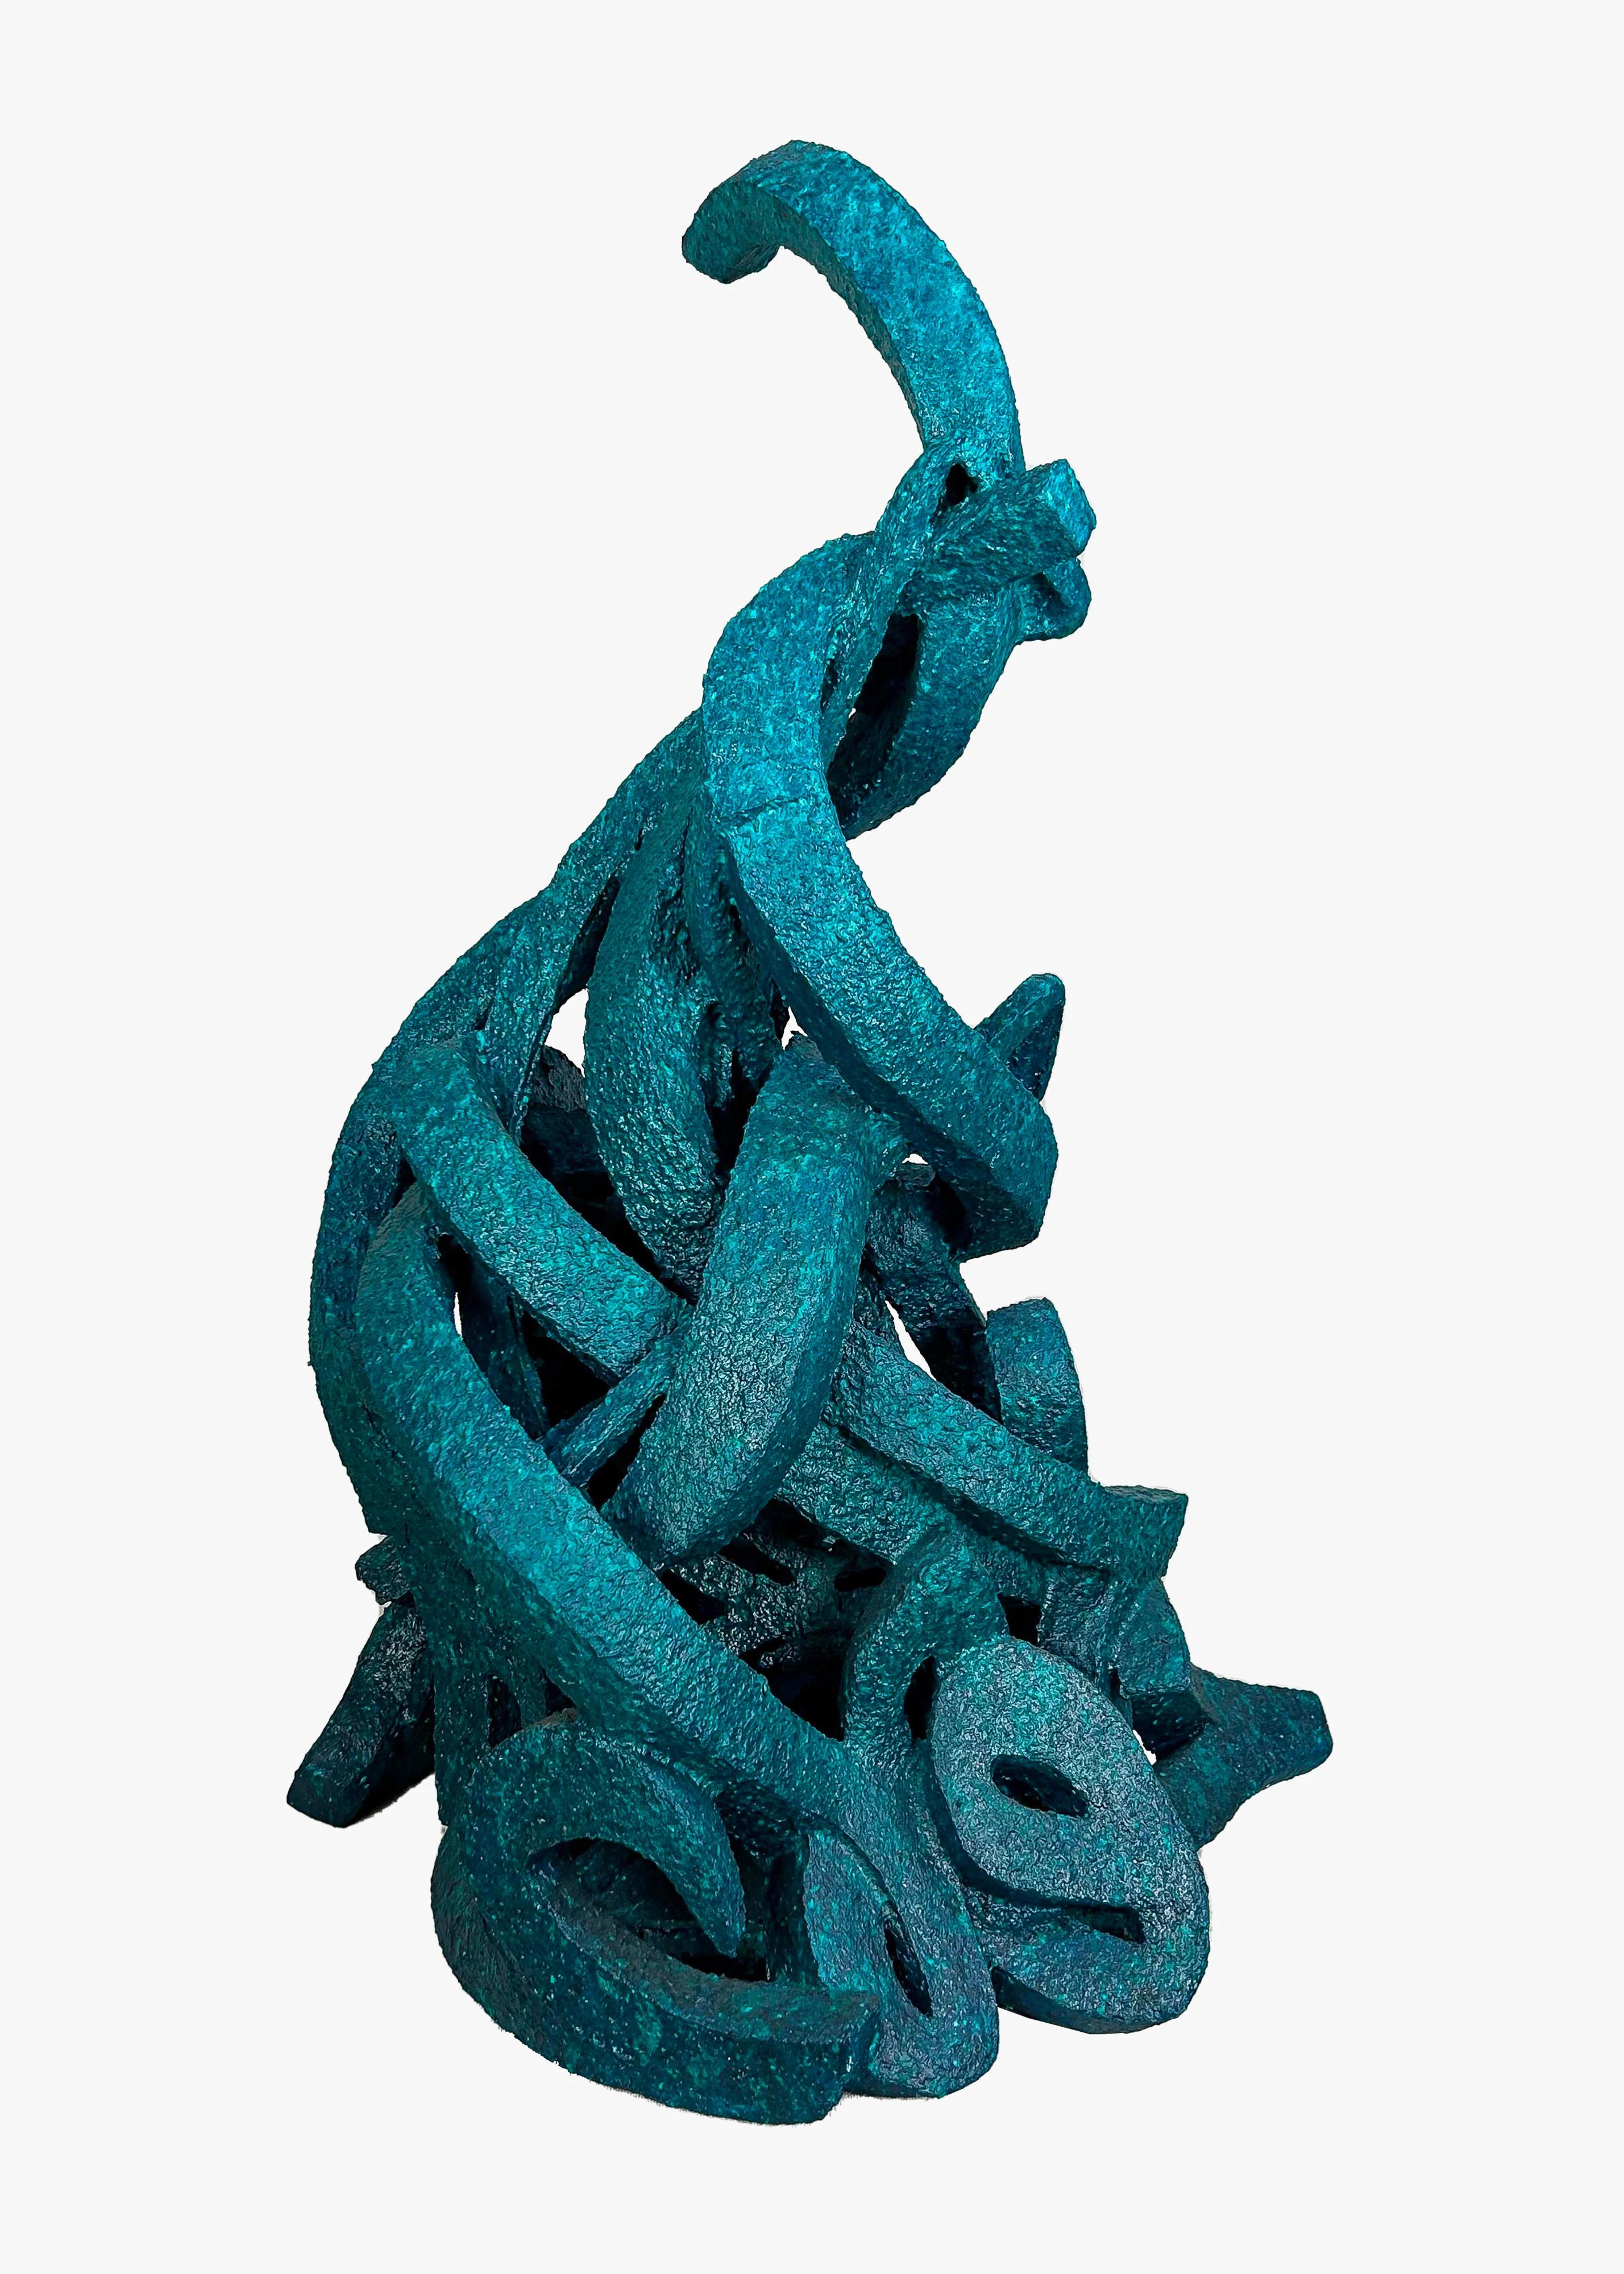 "Calligraphic Cat" Abstract Sculpture 33.5" x 20" x 20" in by Ibrahim Khatab

Ibrahim Khatab was born in Cairo 1984, works as a co-teacher in Cairo University, he mixes between painting, video art and installation in his artworks. He started since